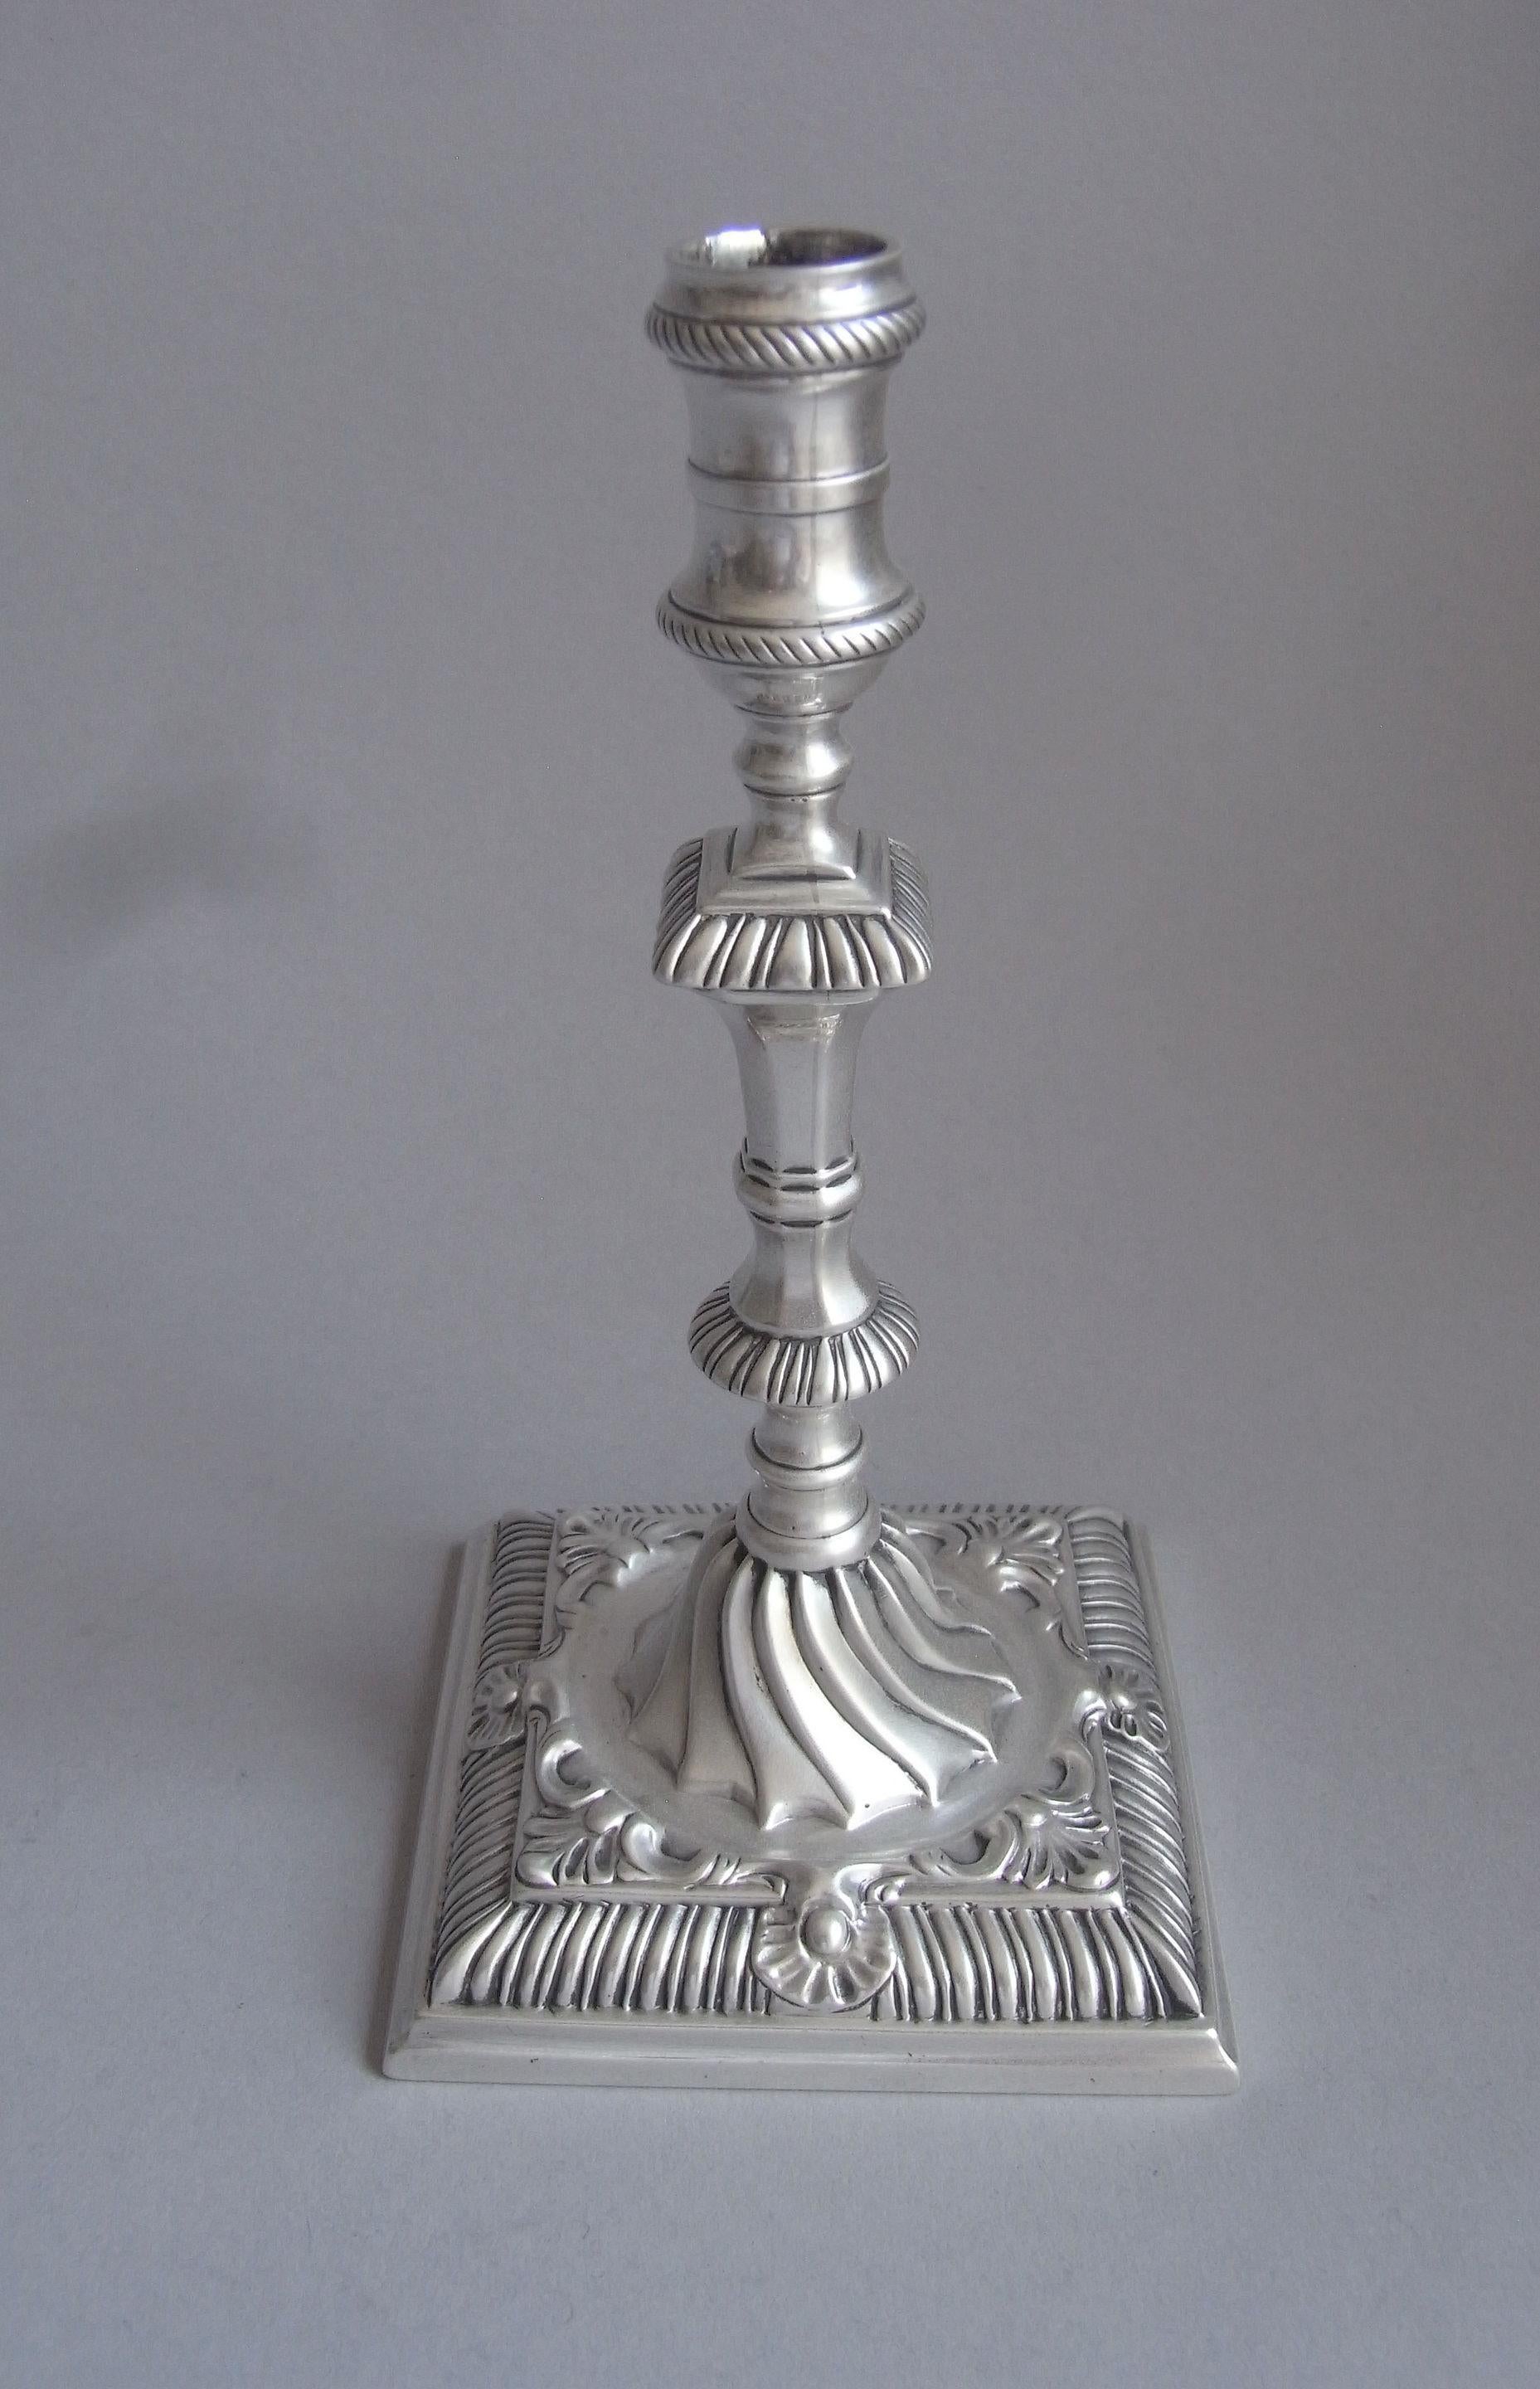 A very unusual early George III Cast Taperstick made in London in 1763 by Ebenezer Coker.

The Taperstick stands on a square base decorated with gadrooning, raying shells, scrollwork and stylised leafage, all below a very unusual domed section of